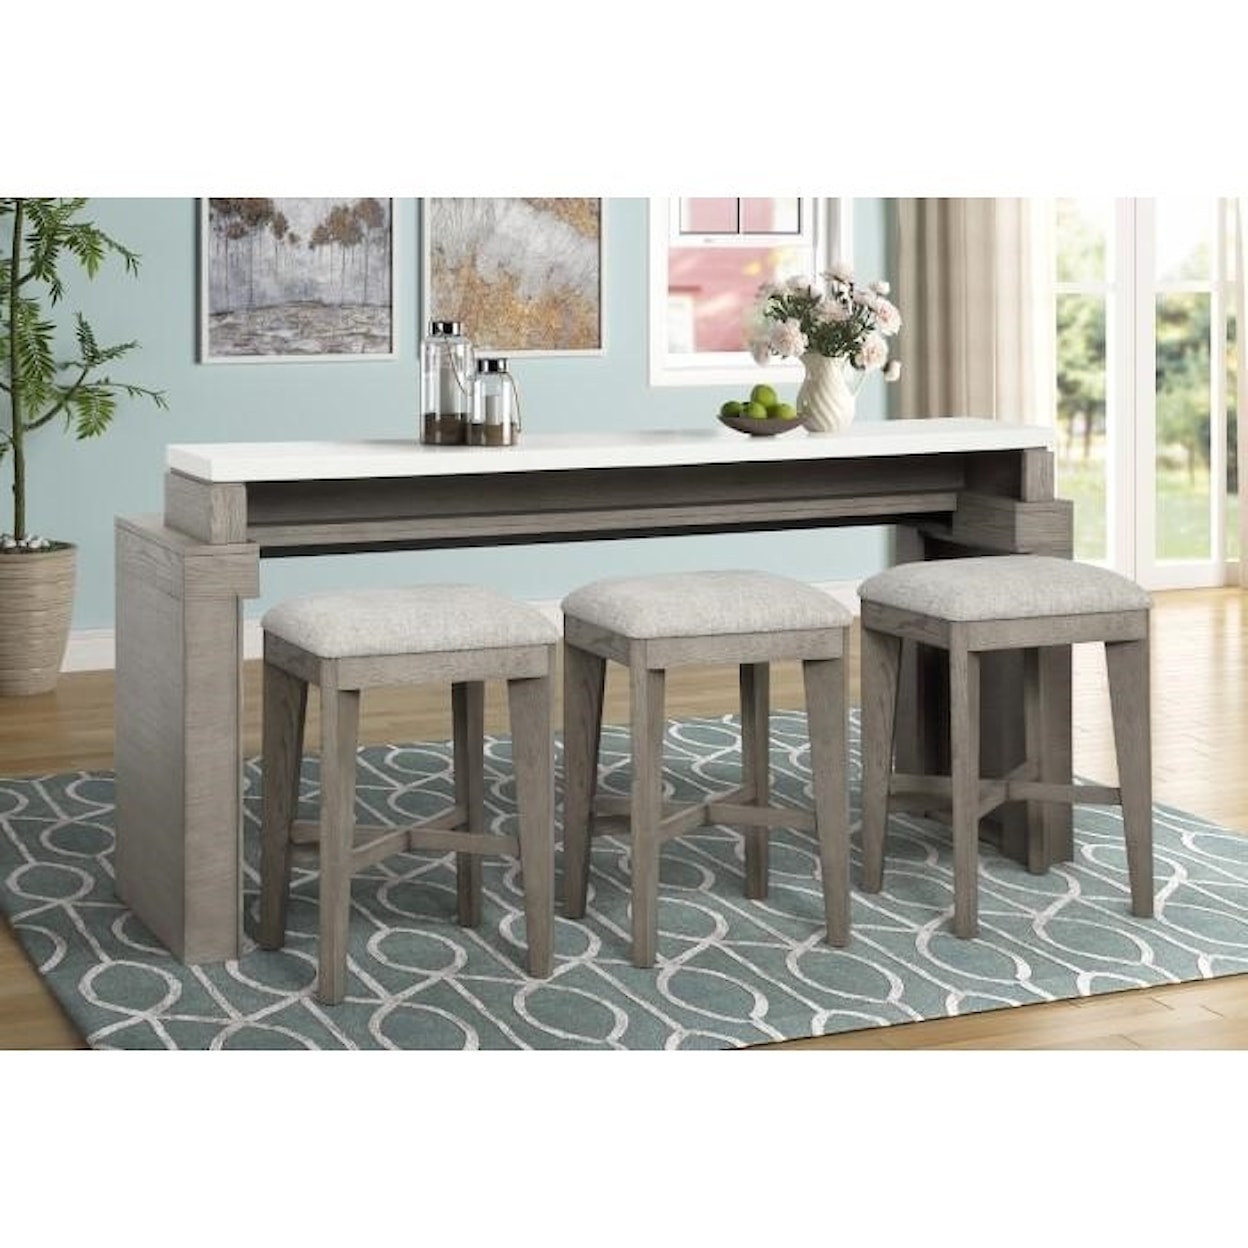 Paramount Furniture Pure Modern Everywhere Console with 3 Stools